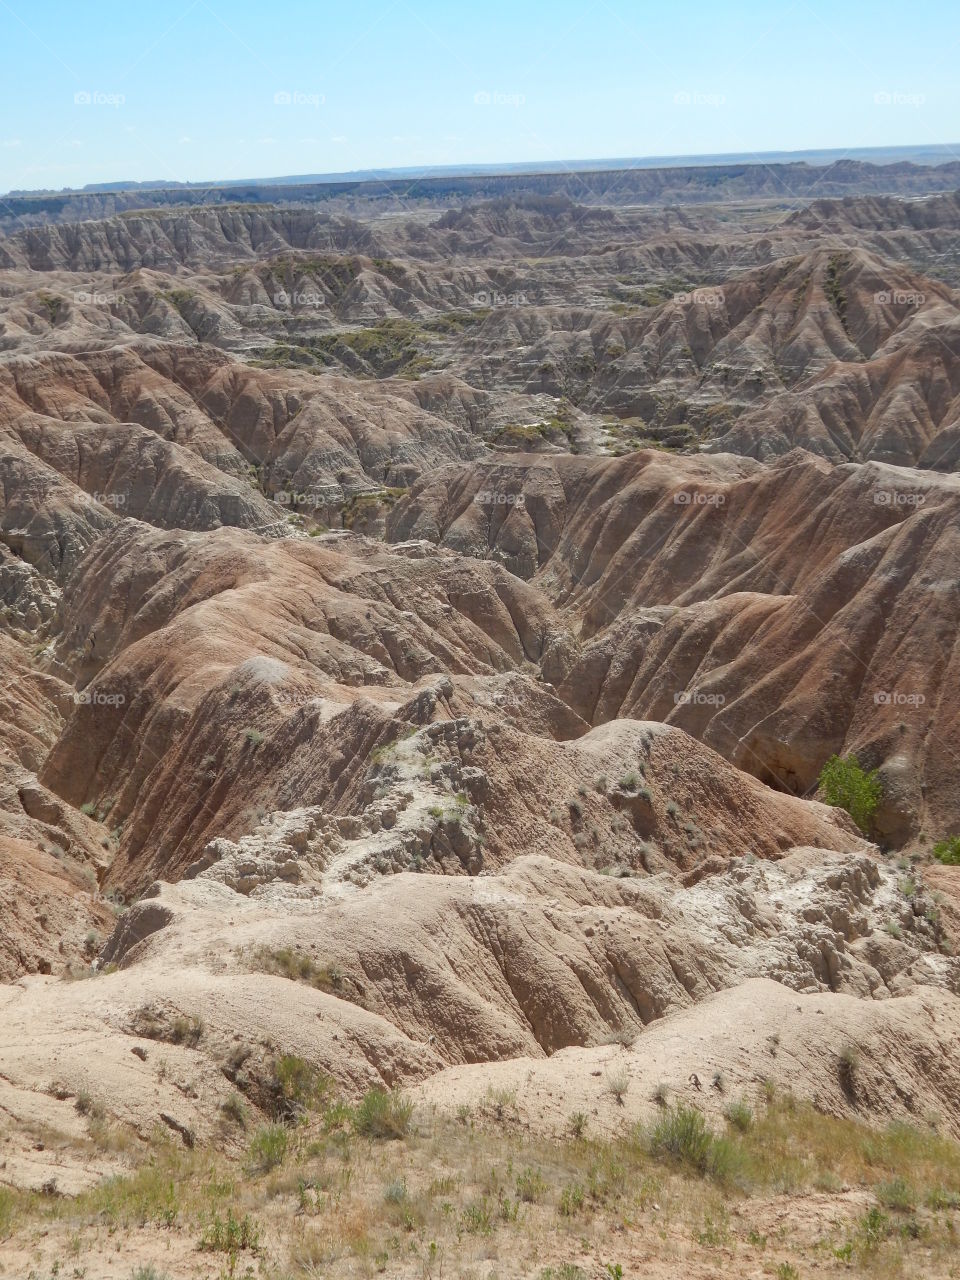 Amazing nature in the Badlands